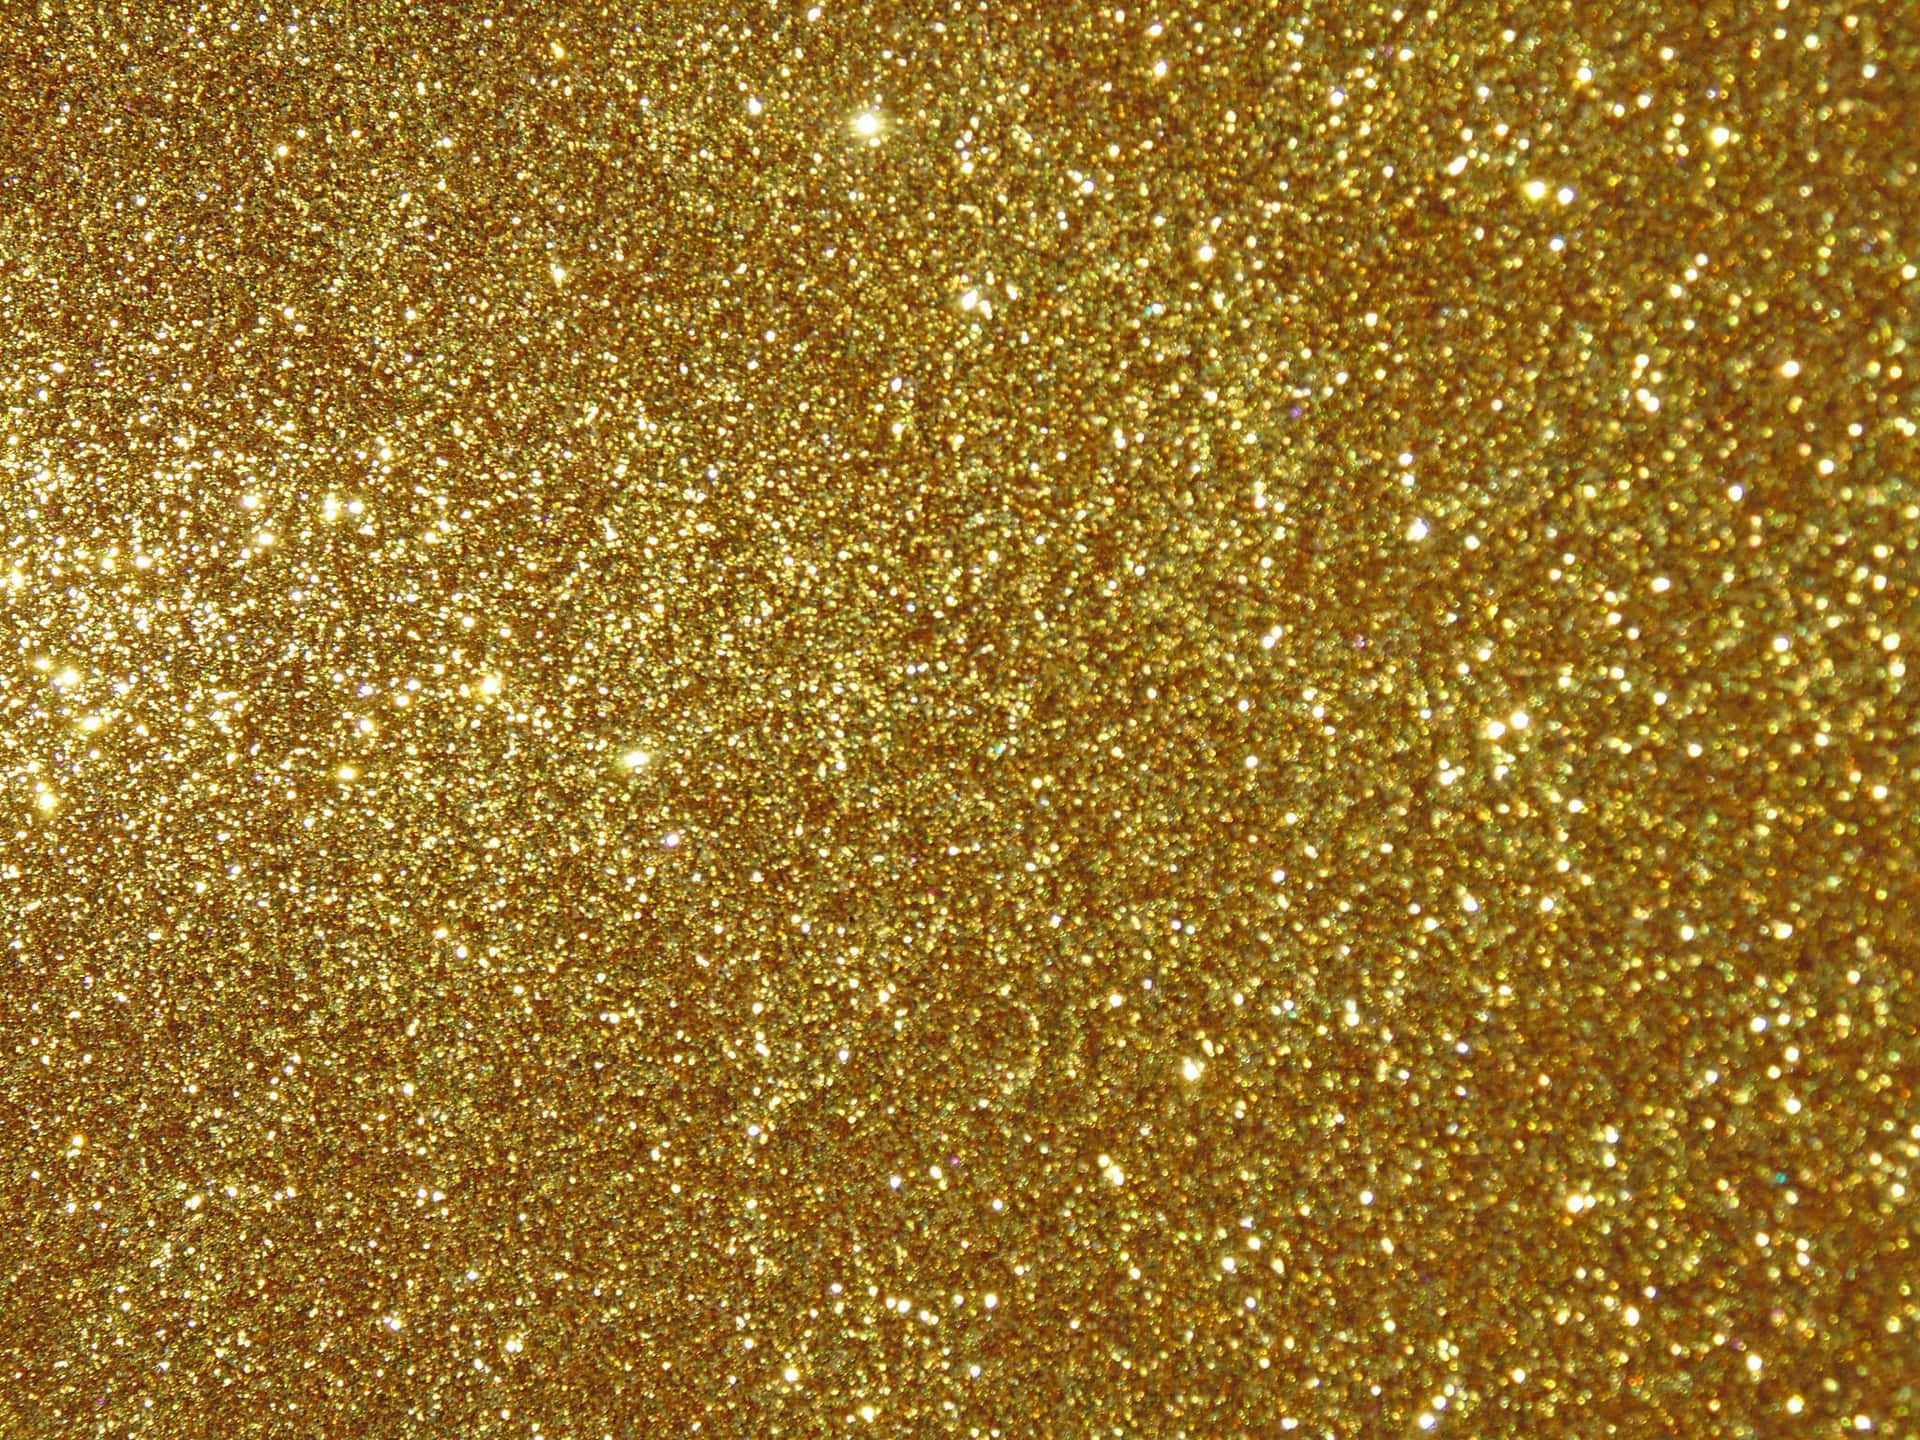 A beautiful gold glitter wallpaper for a glamorous look